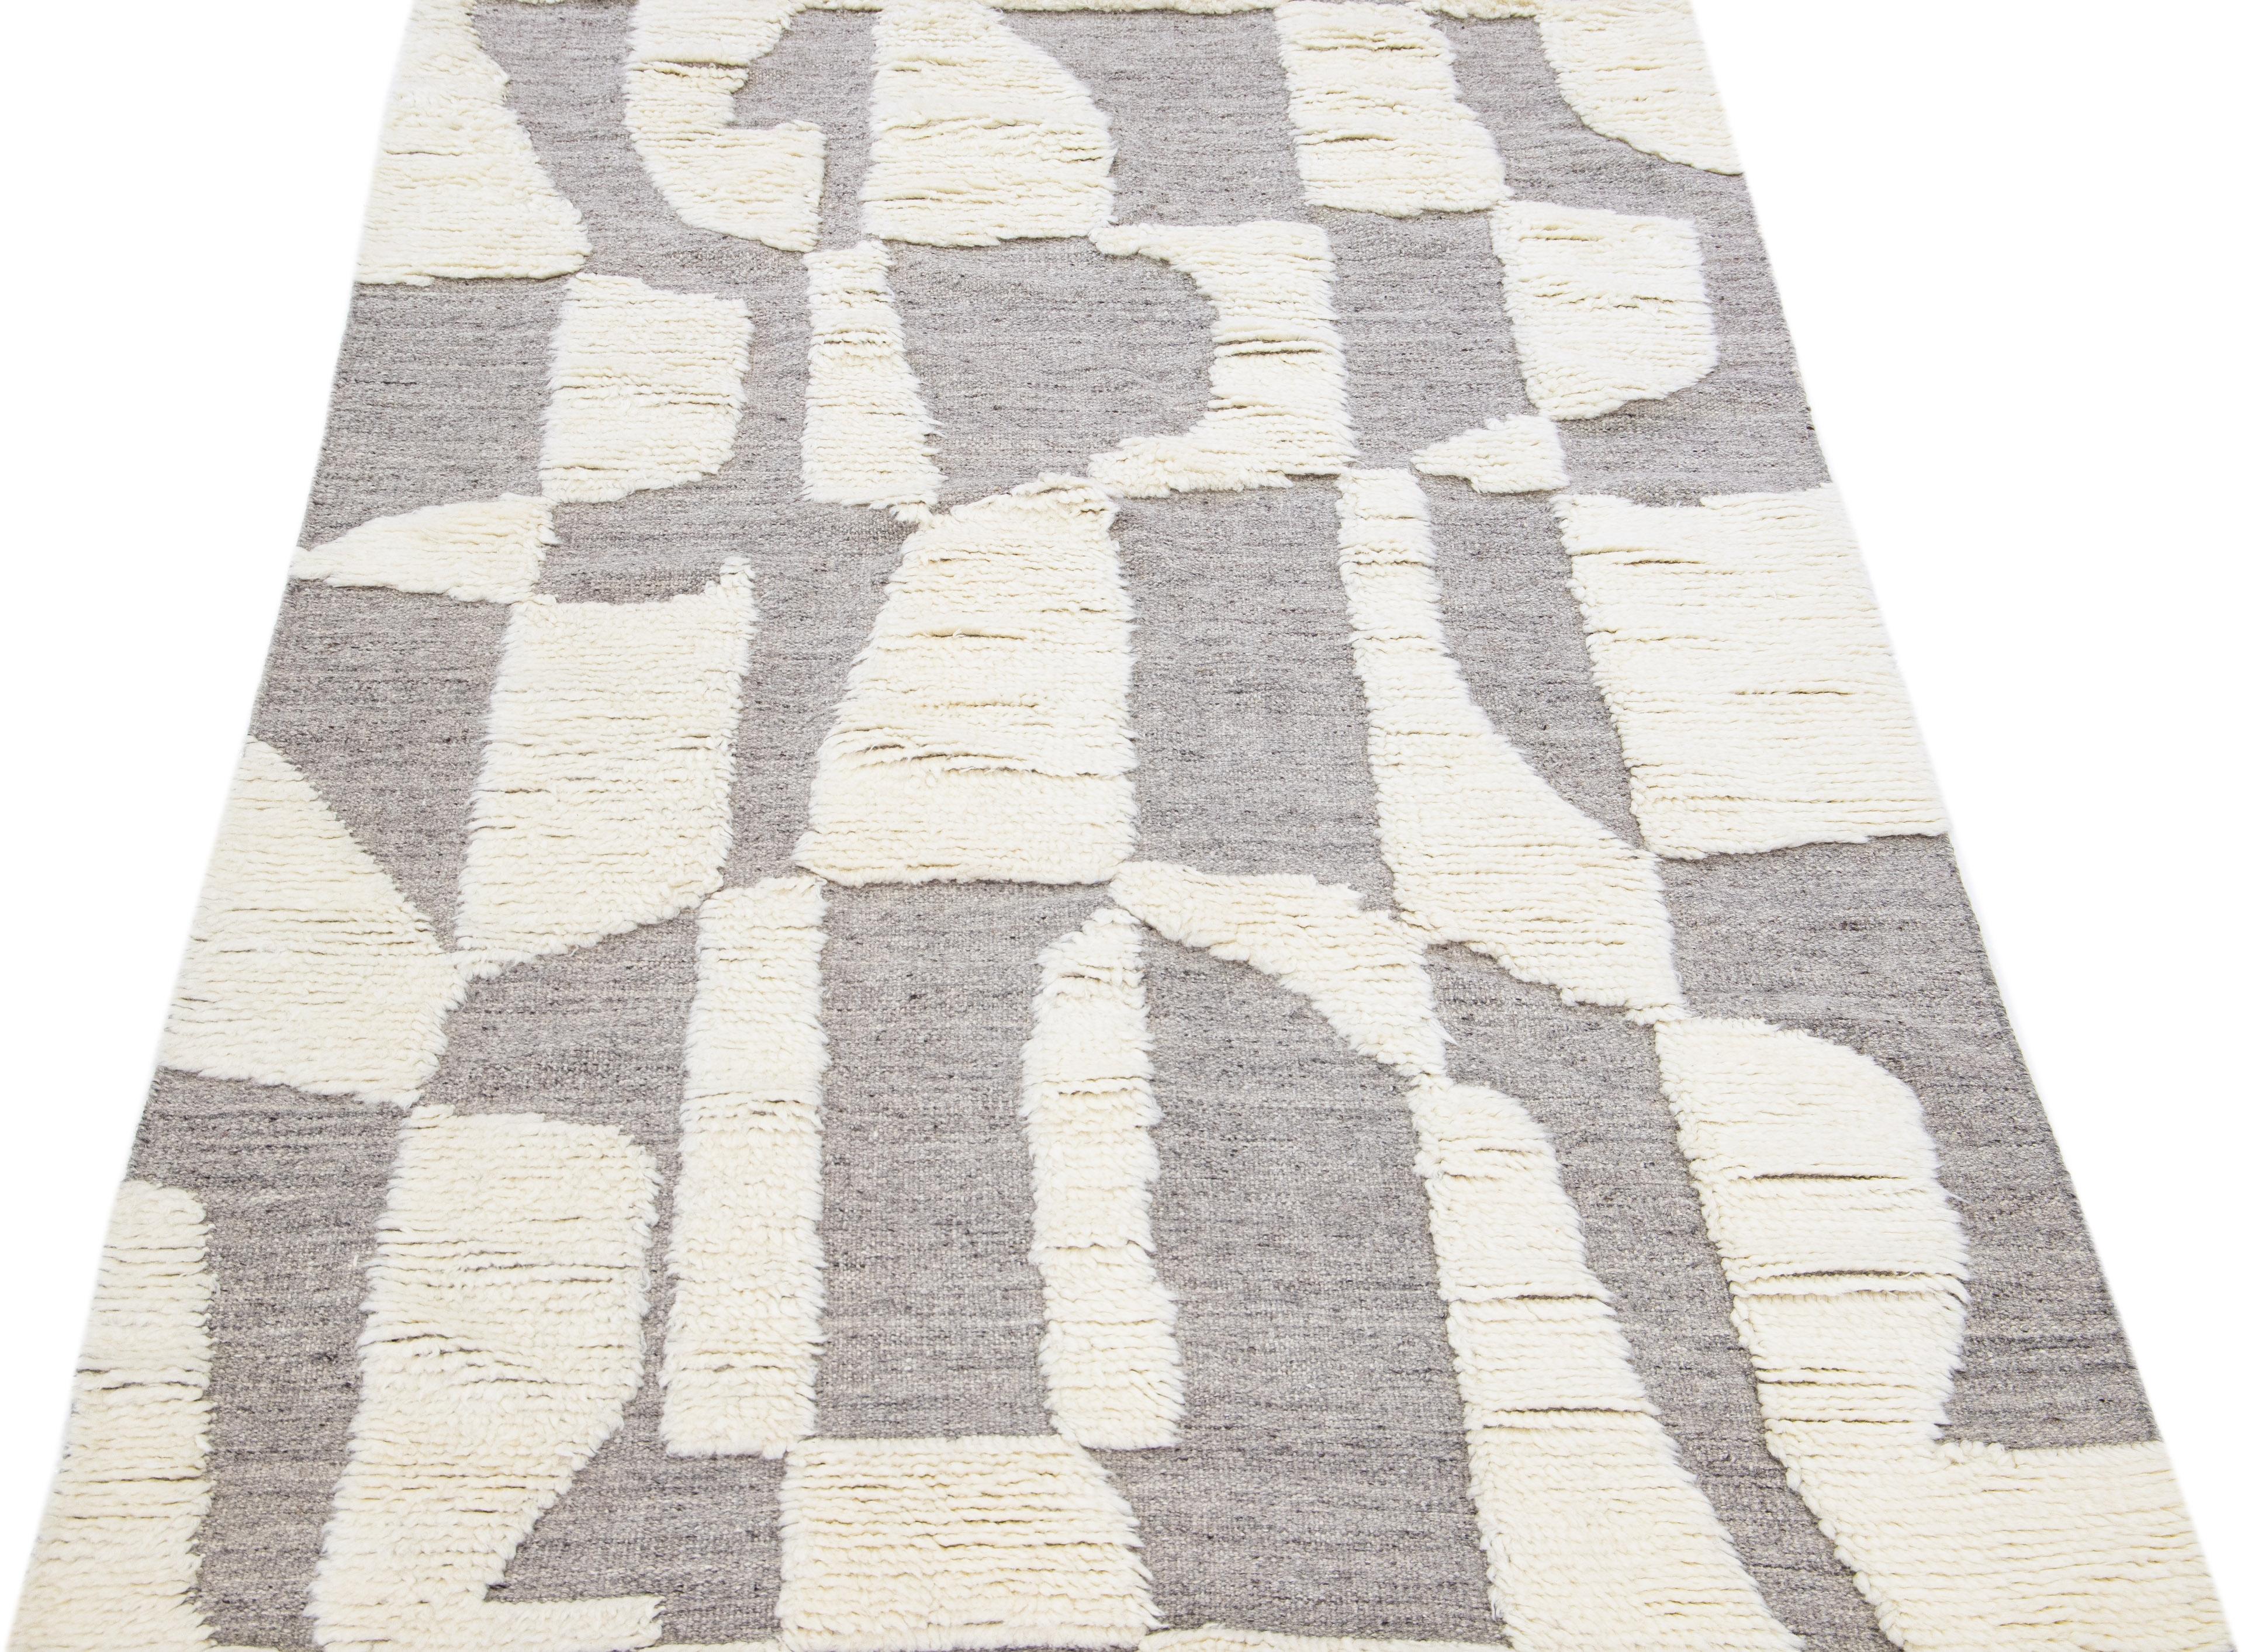 Beautiful modern Moroccan-style hand-knotted wool rug with a gray and white color field. This rug is part of our Apadana's Safi Collection and features an abstract design.

This rug measures: 5' x 8'.

Our rugs are professional cleaning before